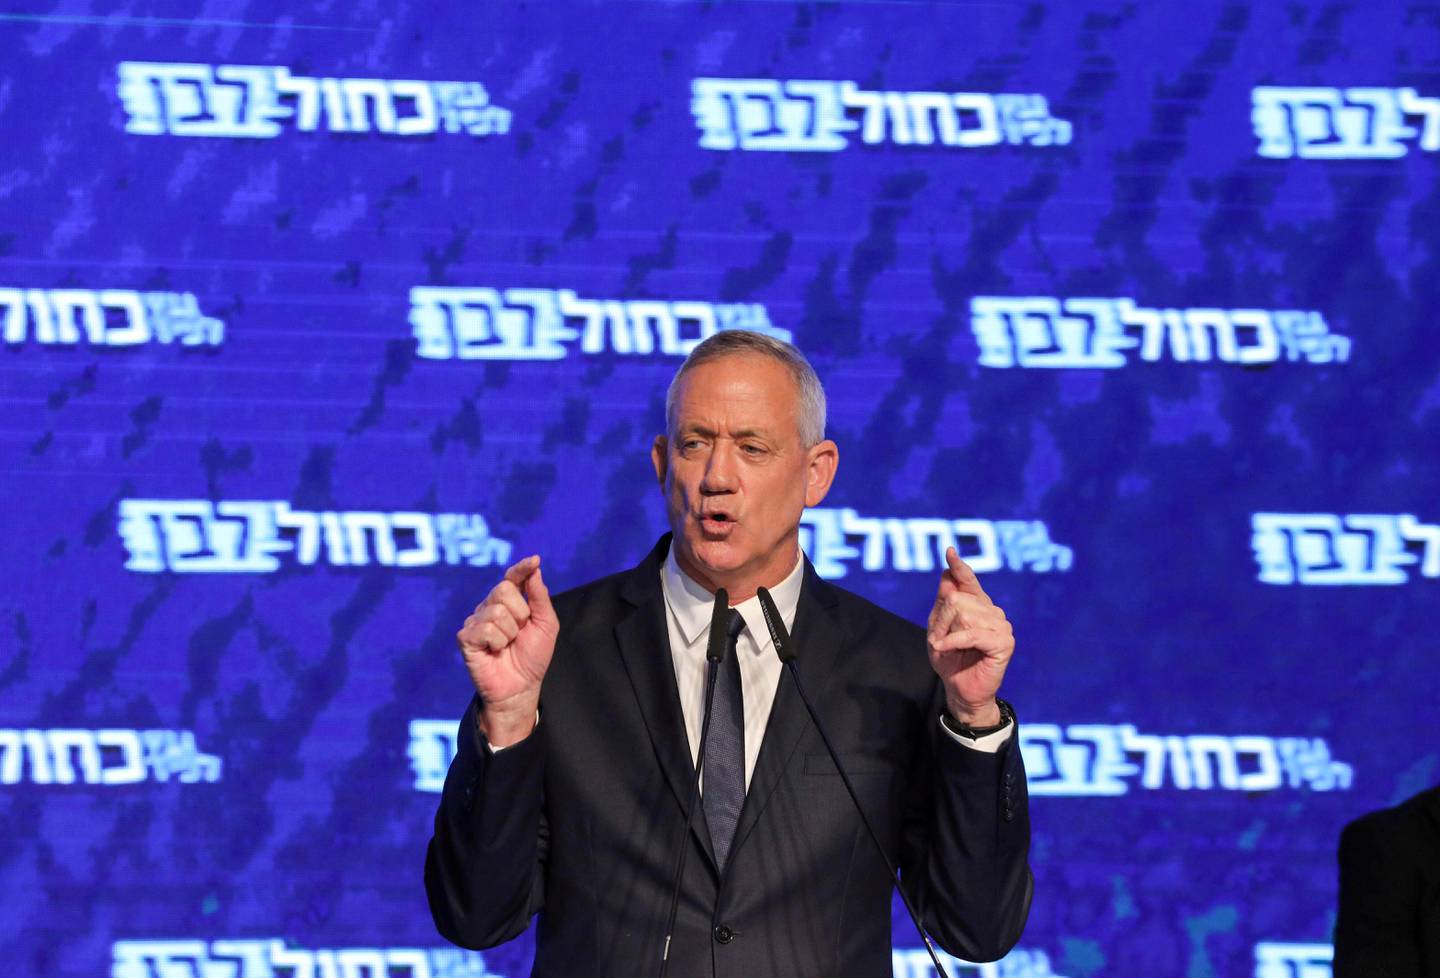 Retired Israeli general Benny Gantz, one of the leaders of the Blue and White (Kahol Lavan) political alliance, speaks before supporters at the alliance headquarters in Tel Aviv on April 10, 2019. (Photo by GALI TIBBON / AFP)